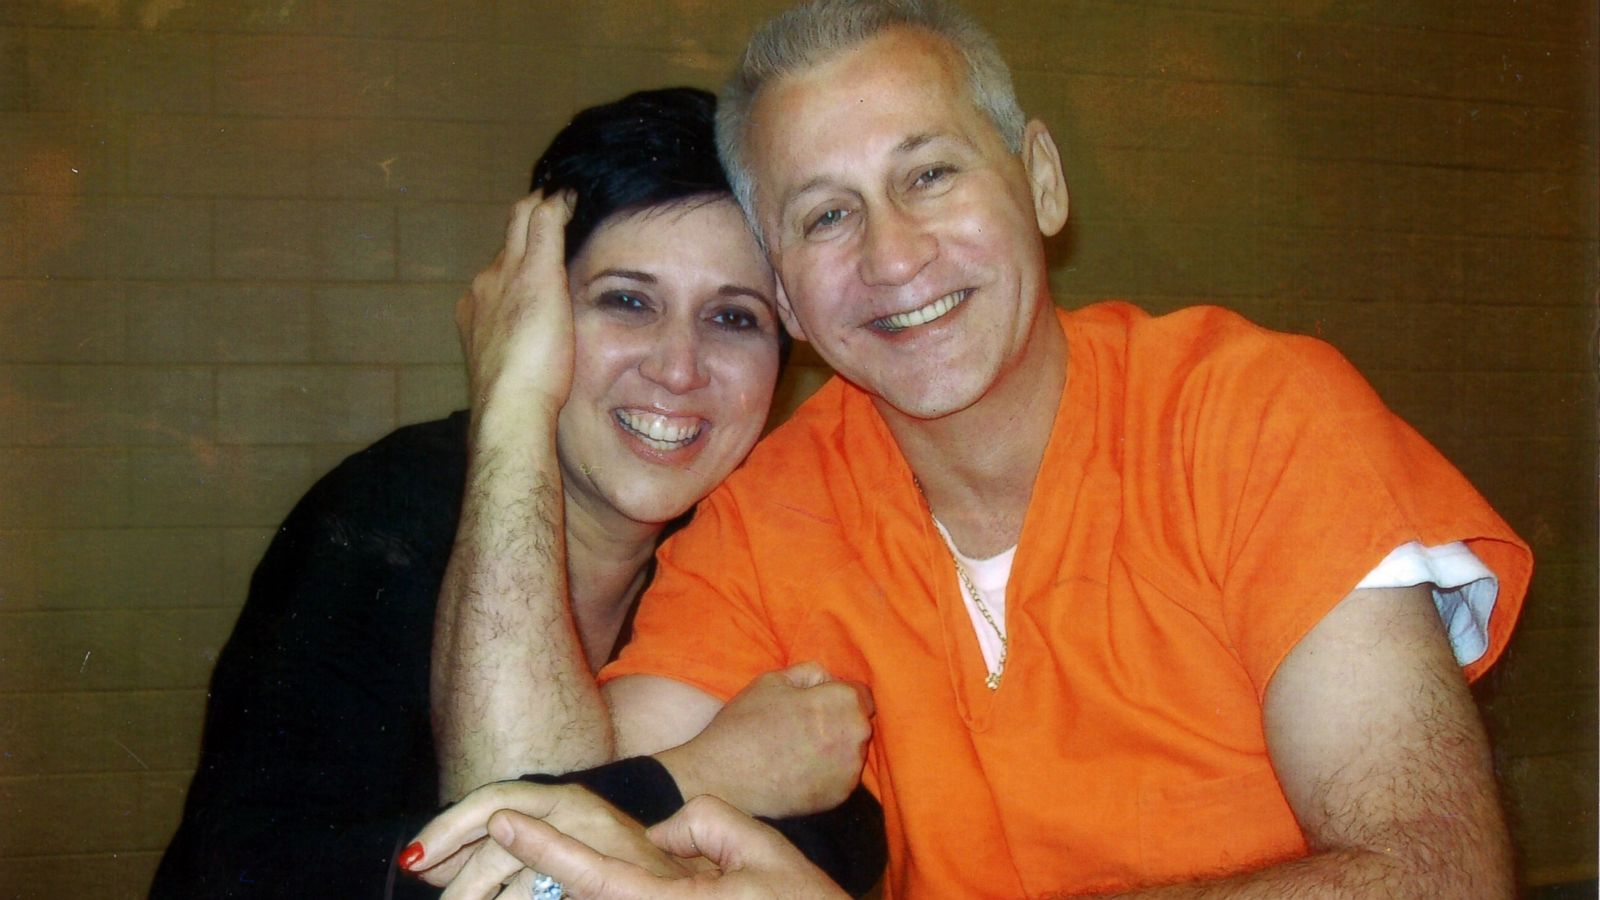 What is the benefit of marrying an inmate?